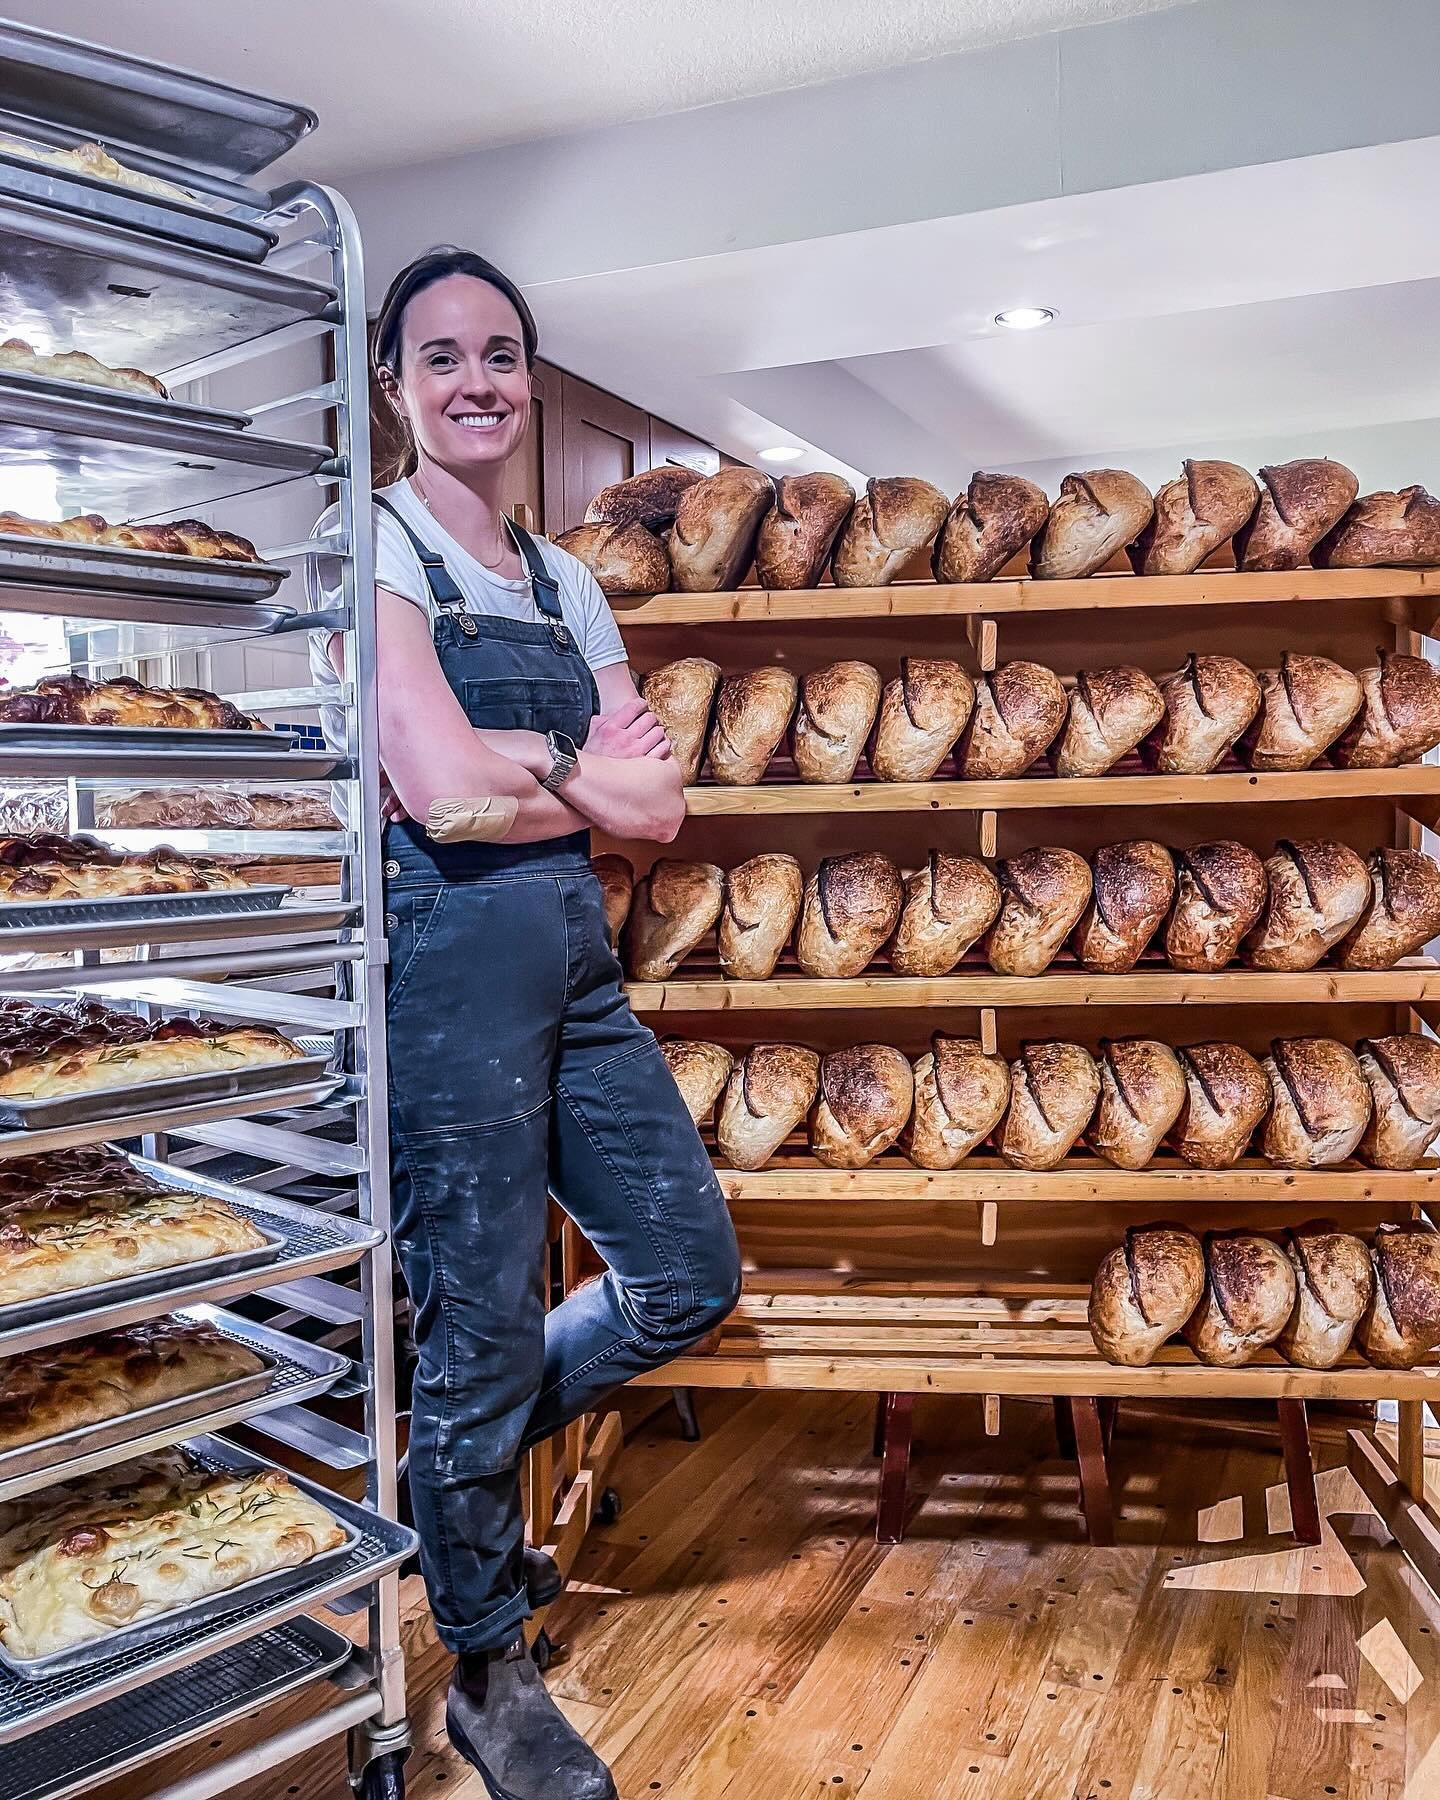 Bake no&deg; 14 of the year. 

I say this every week but the sourdough bread this week was stunning. 

It was a wild week, as most weeks are. I spent the first part deep cleaning the bakery and organizing it. Then my friend, the talented photographer